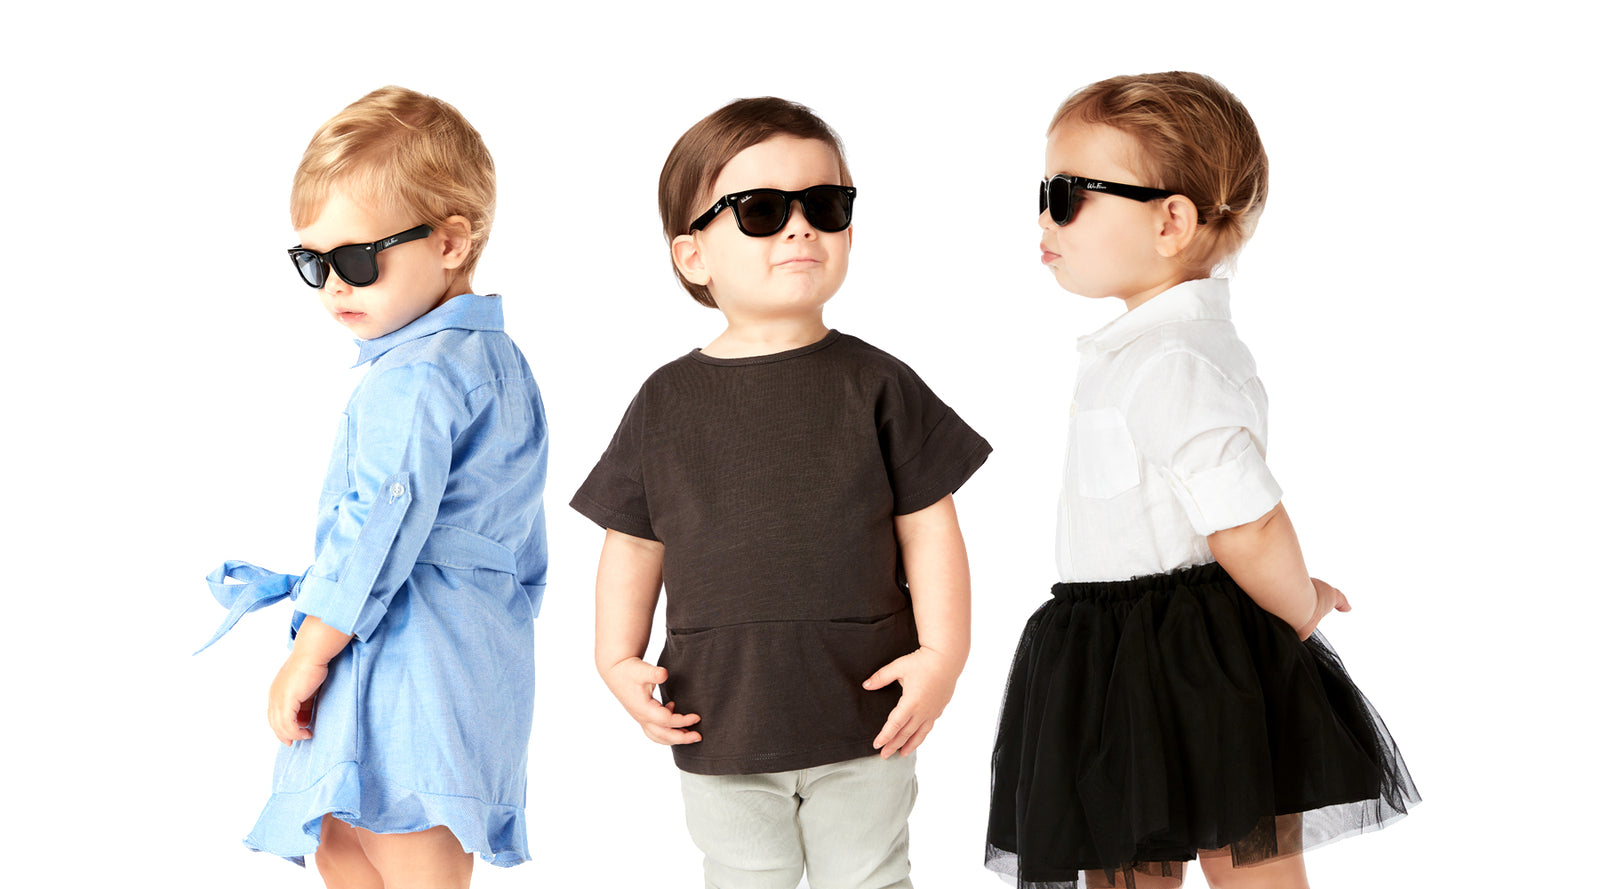 Official WeeFarers® Children's Sunglasses by WeeStyle Co.